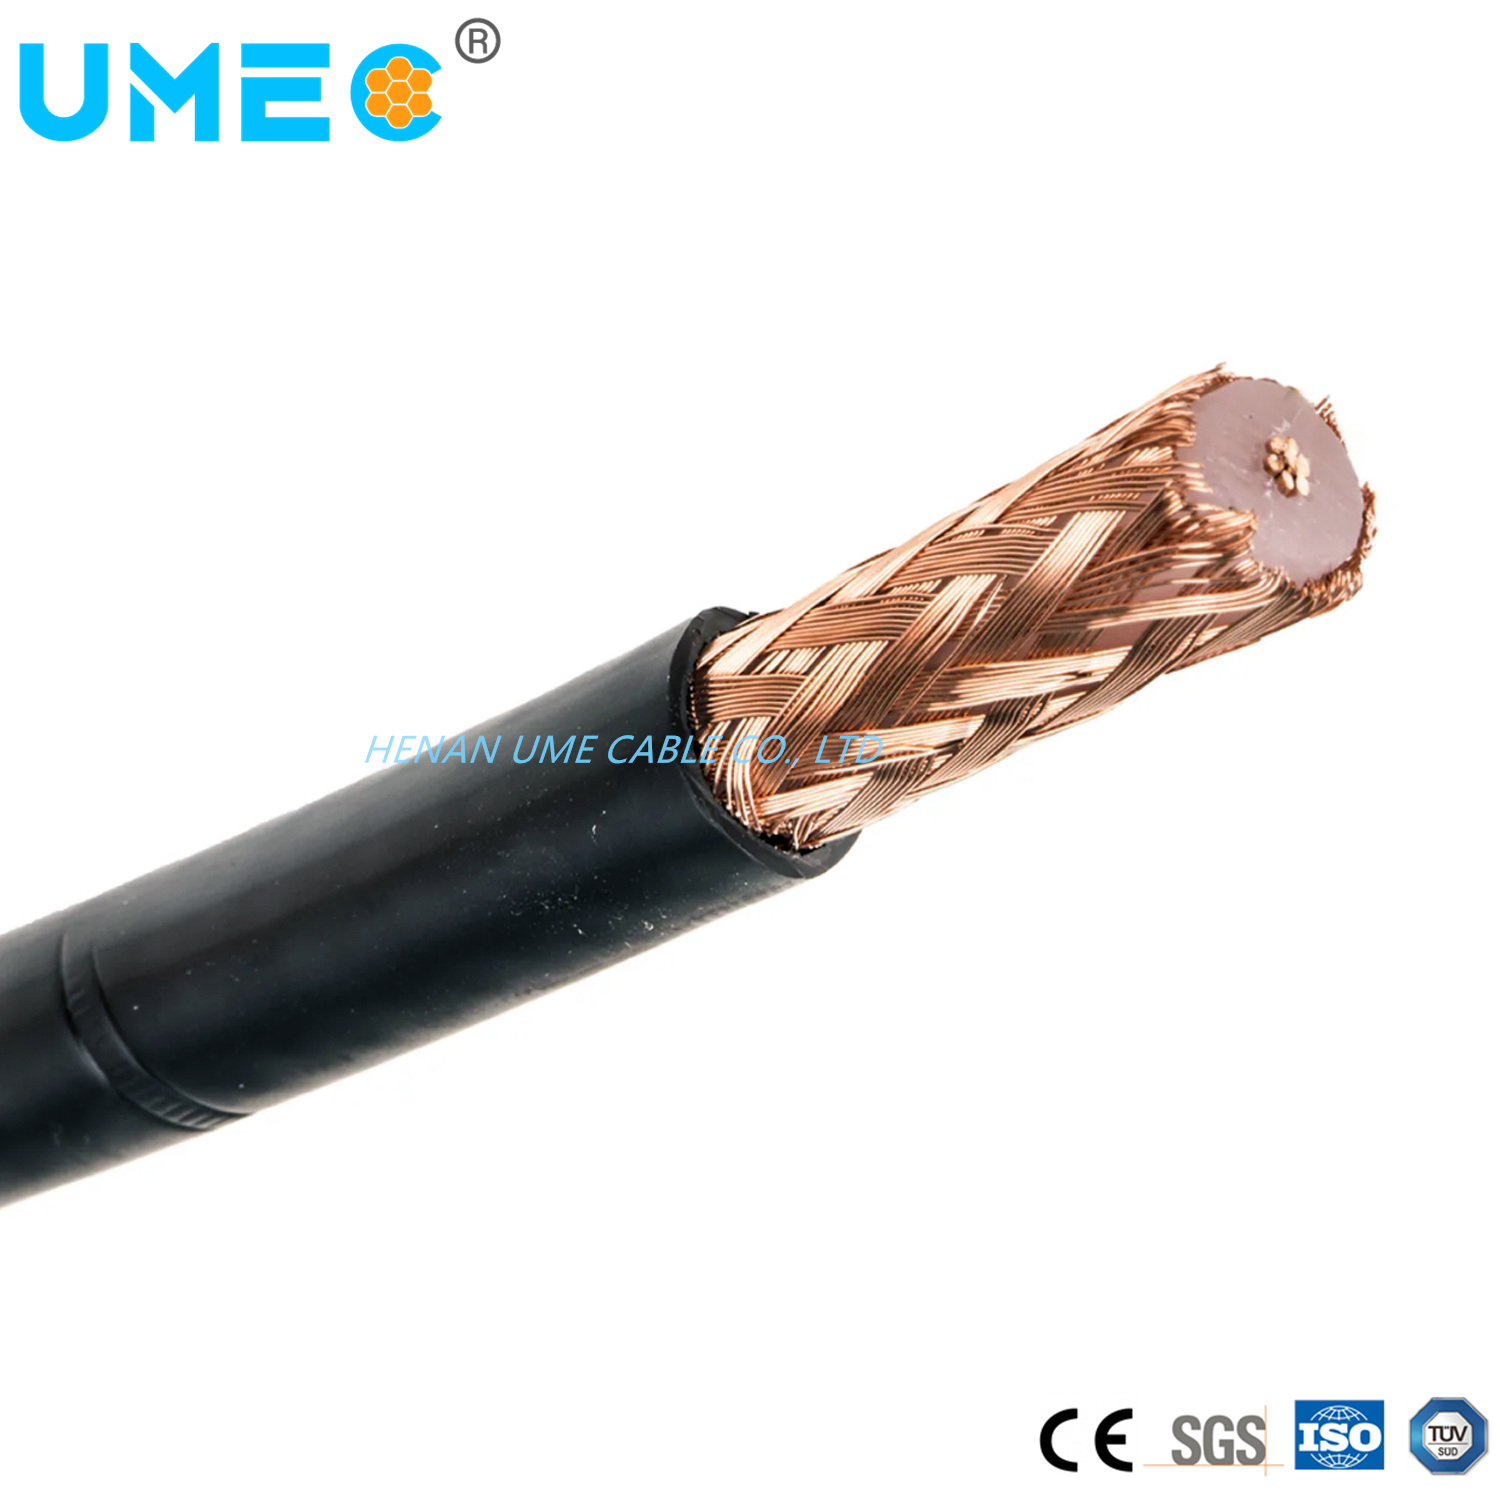 Low Loss 7/8 Flexible RF Coaxial Cable with Black PE/LSZH Jacket Coaxial Cable for Mobile Network and Telecommunication Coaxial Cable